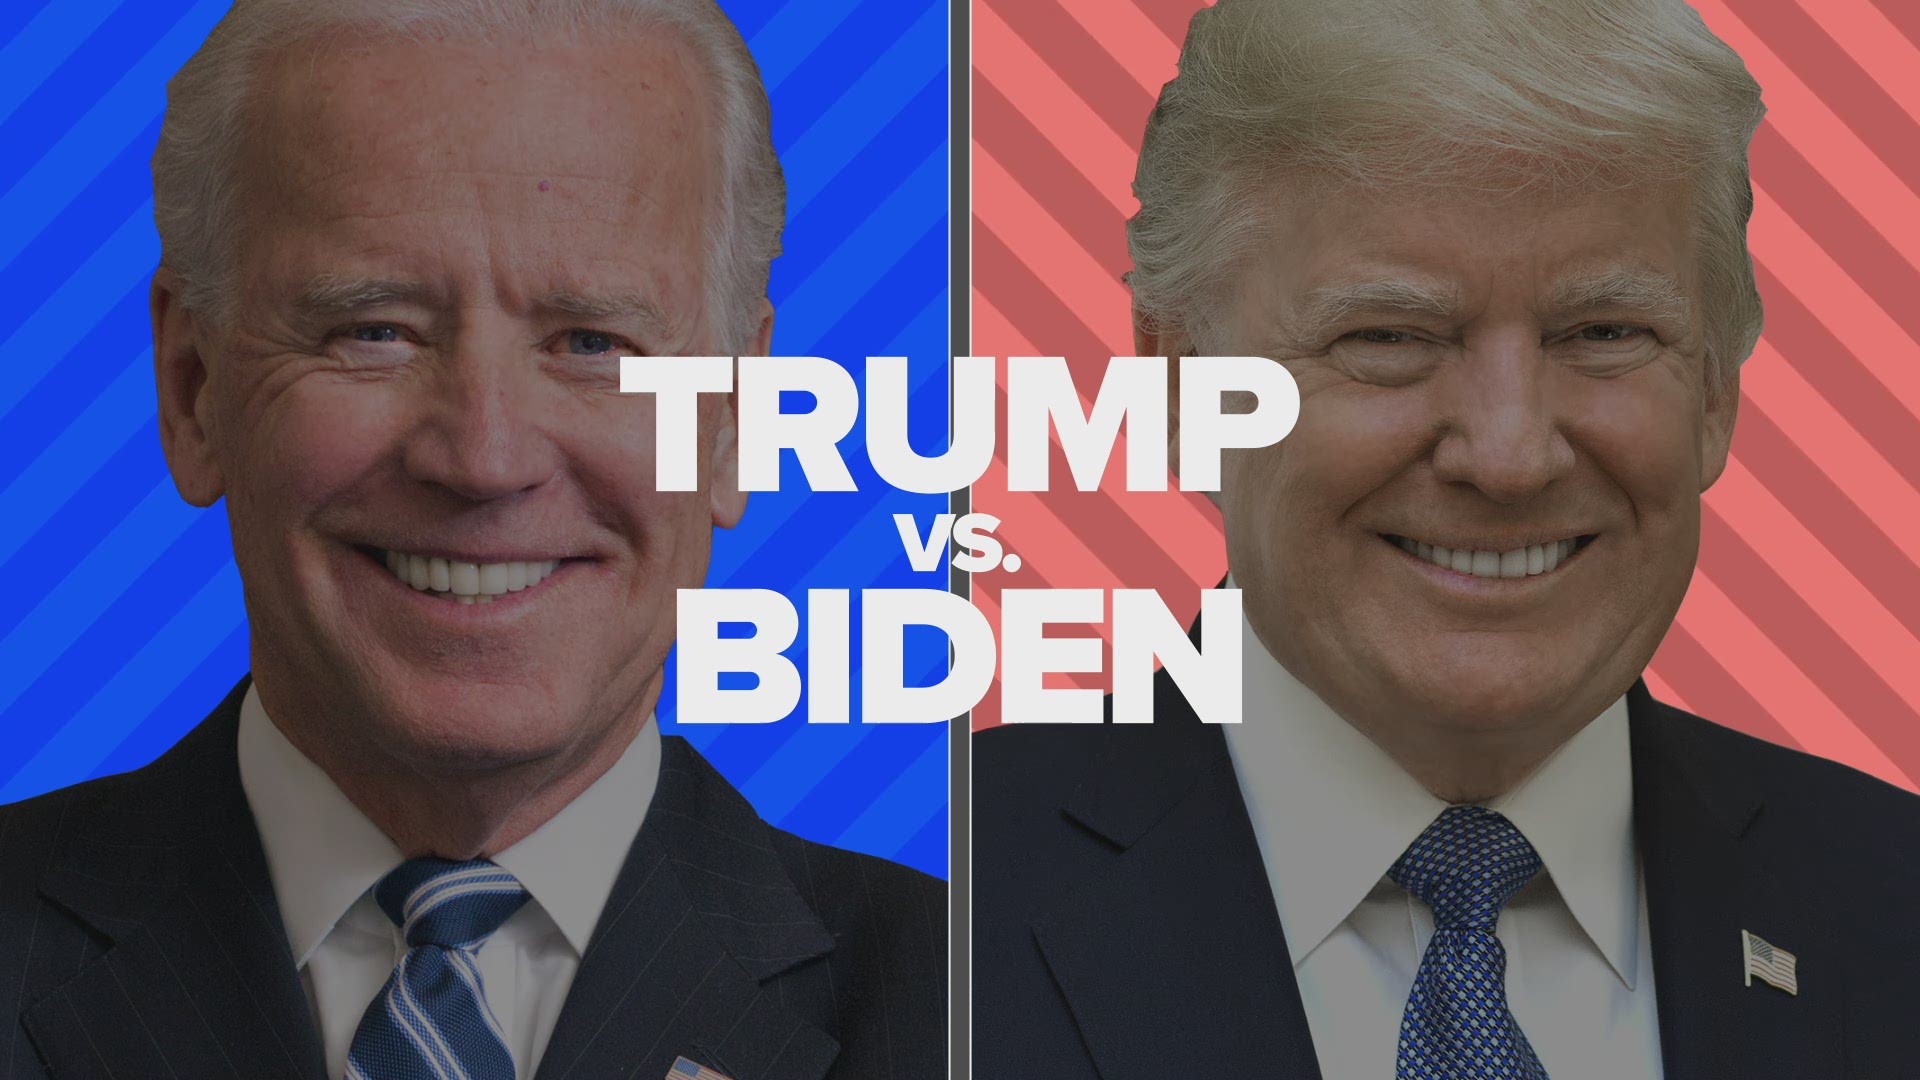 A closer look at President Donald Trump and former Vice President Joe Biden as they head toward the 2020 election.